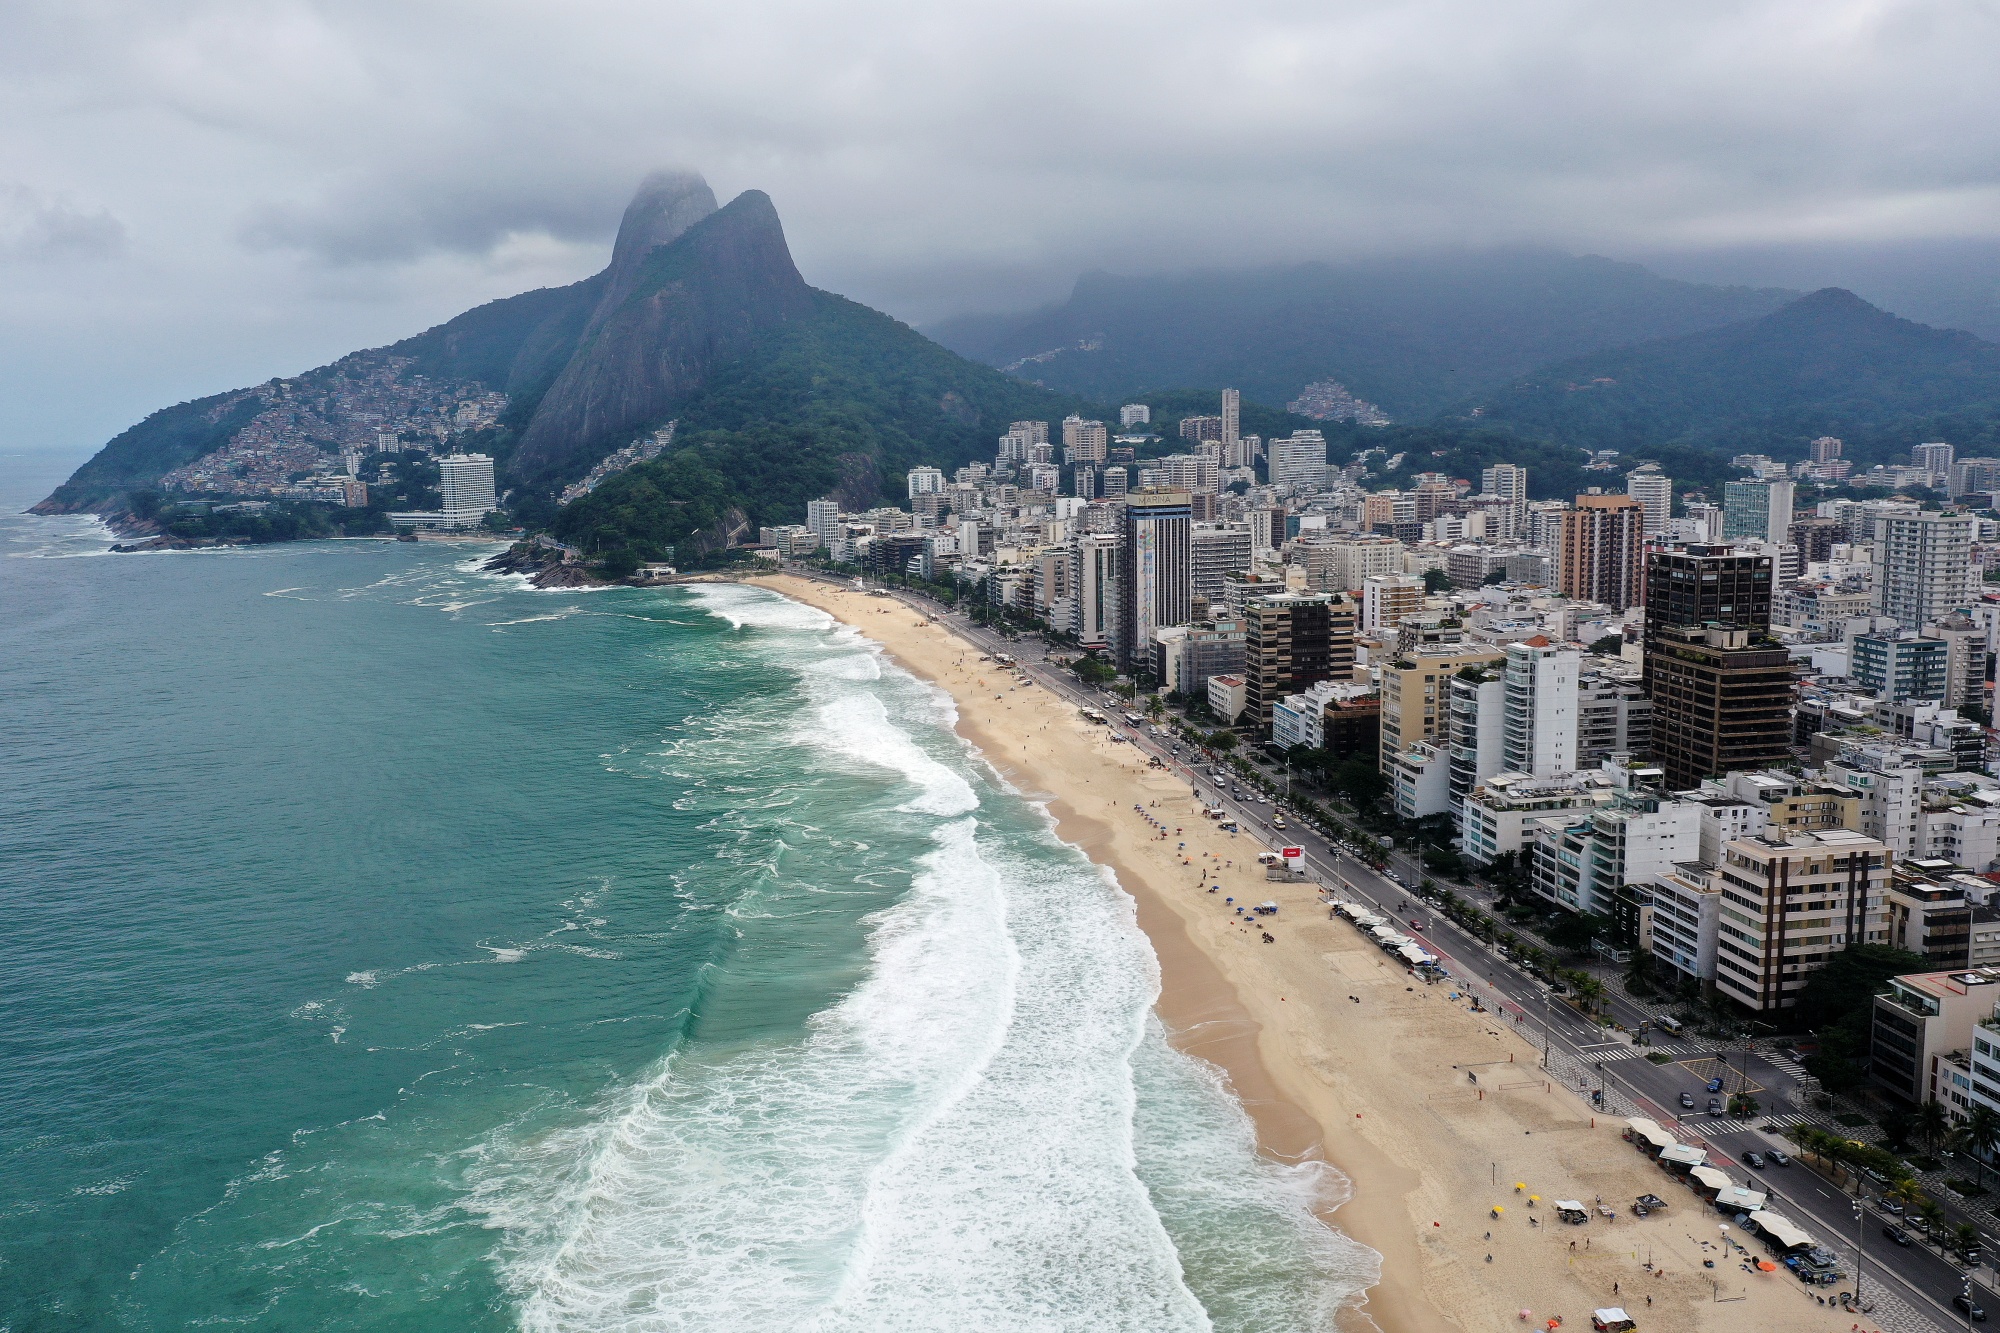 Rio de Janeiro Competes to Lure Remote Workers, Crypto, Startups - Bloomberg